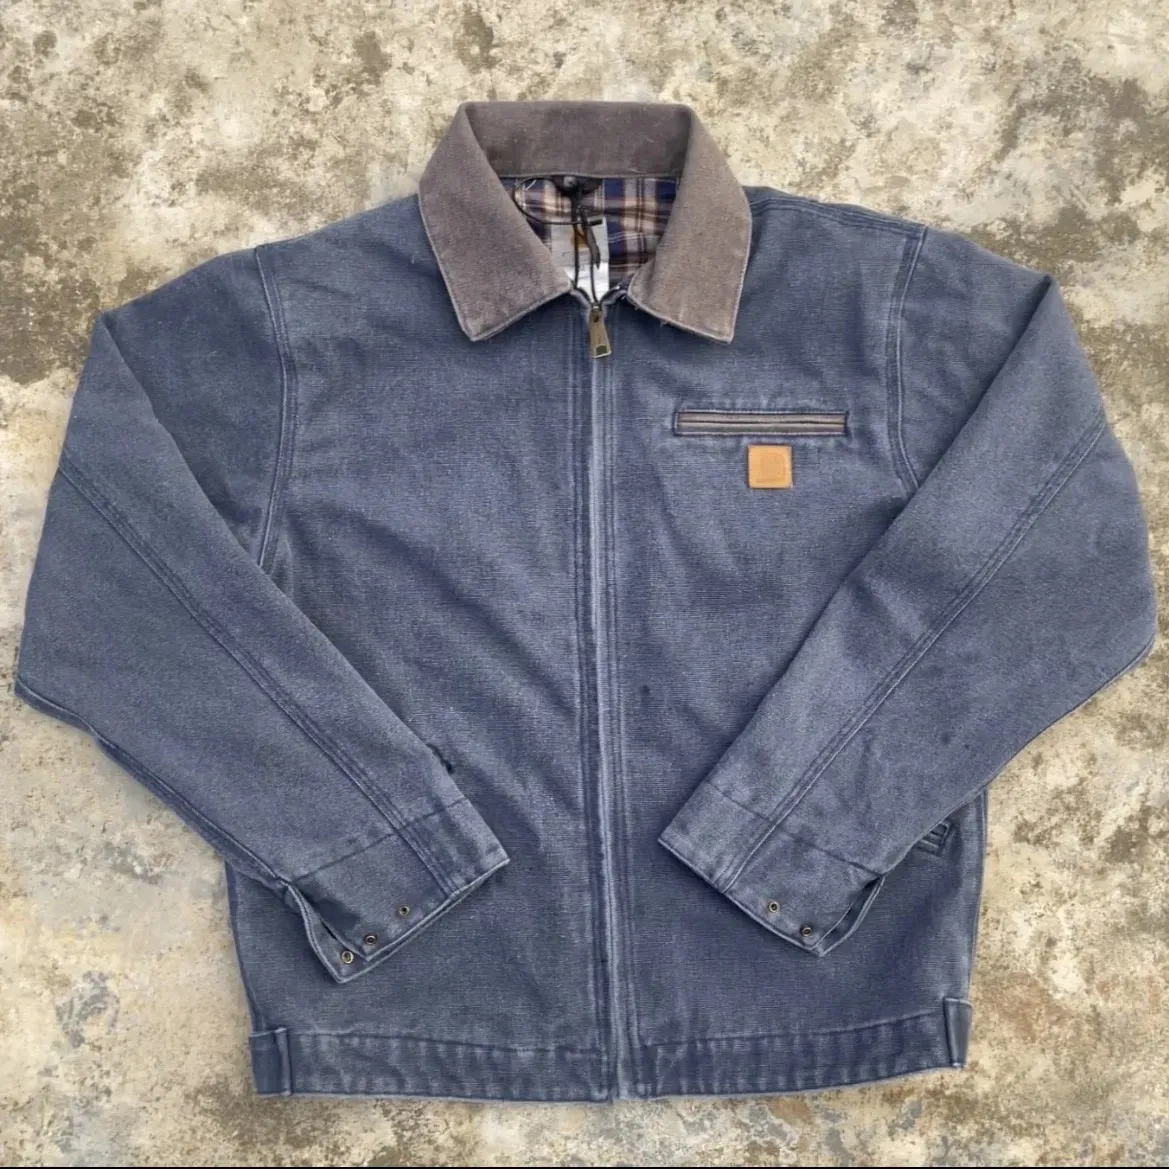 Vintage Washed Canvas Designer Mens Carhart Jacket With Lapel And ...